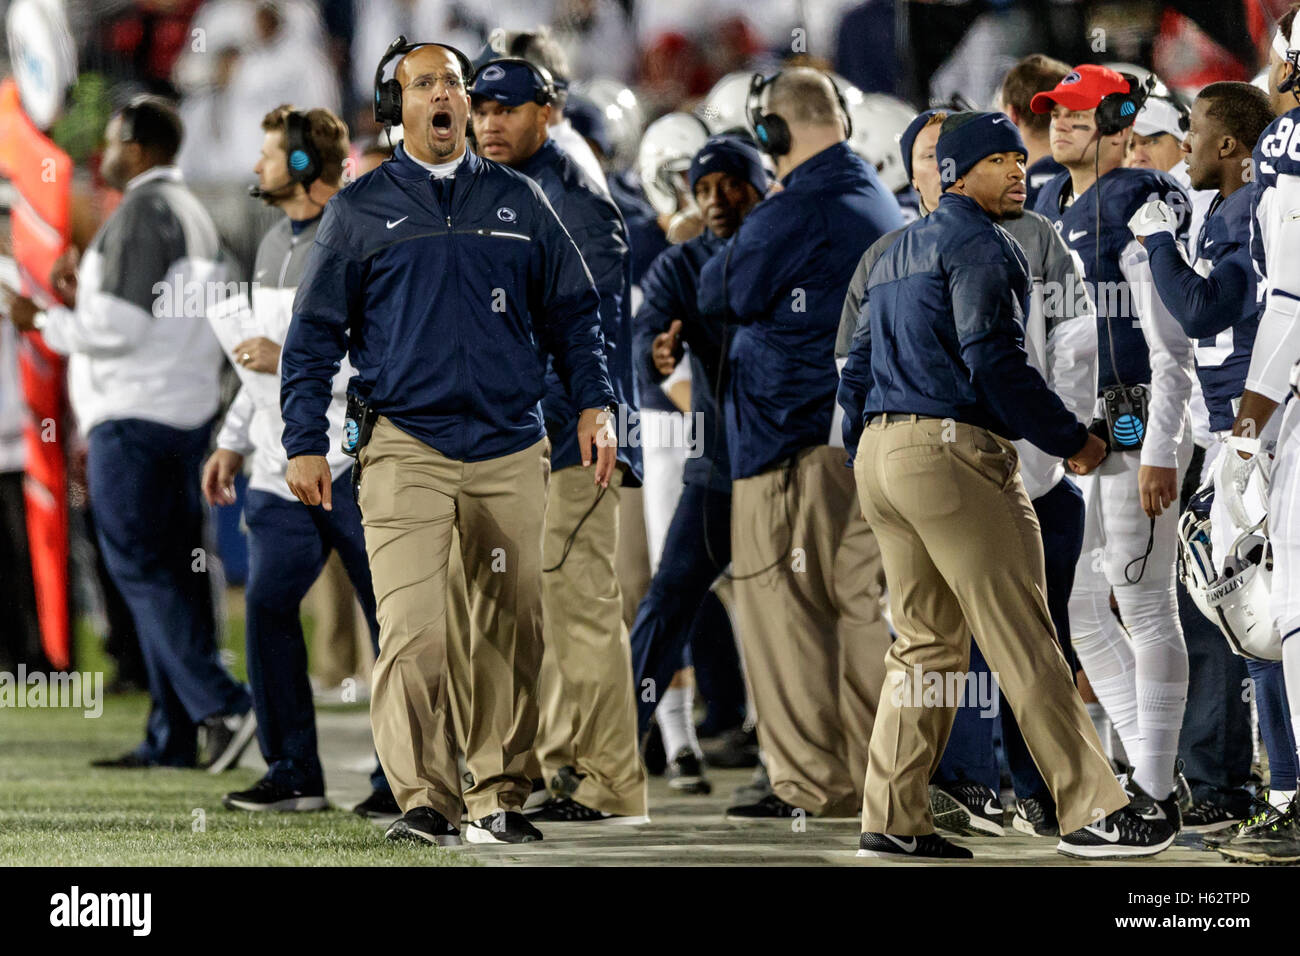 University Park, Pennsylvania, USA. 21st Oct, 2016. October 22nd, 2016: Penn State Nittany Lions head coach James Franklin during NCAA football game action between the Ohio State Buckeyes and the Penn State Nittany Lions at Beaver Stadium, University Park, PA. Photo by Adam Lacy/Zuma Wire © Adam Lacy/ZUMA Wire/Alamy Live News Stock Photo